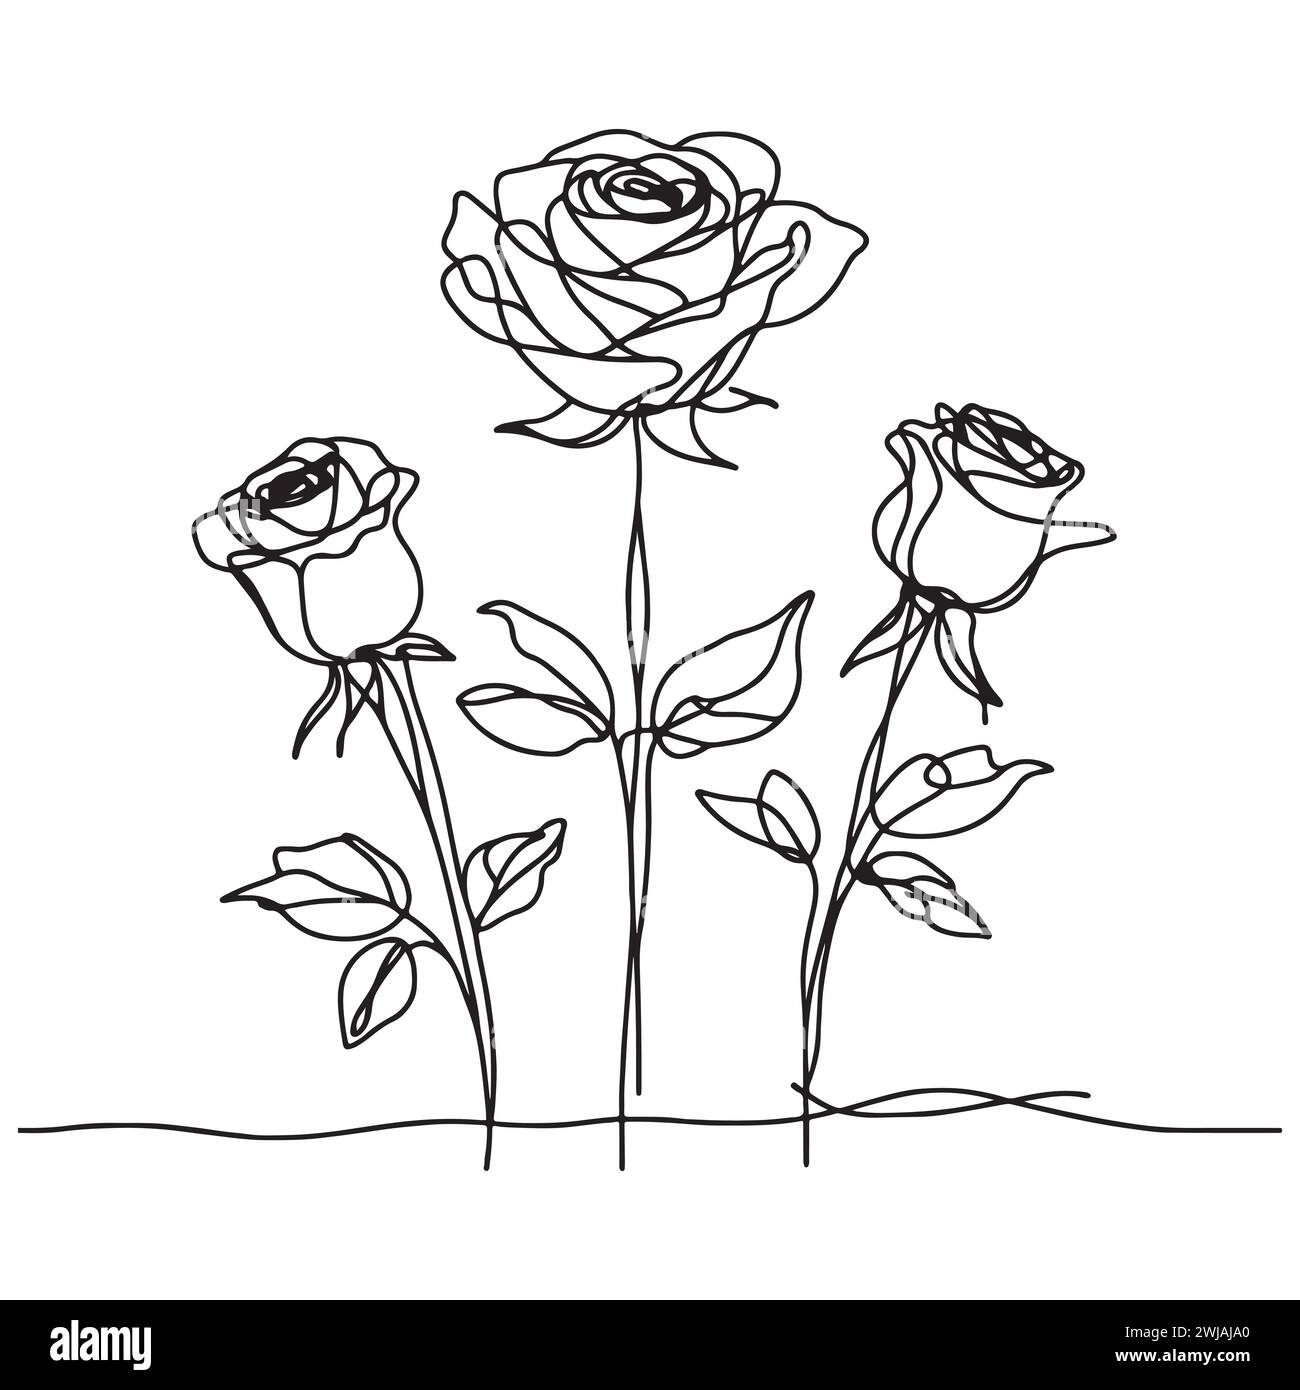 A minimalist yet sophisticated depiction featuring three roses in a linear sketch design. The floral arrangement is rendered in monochrome palette. Stock Vector